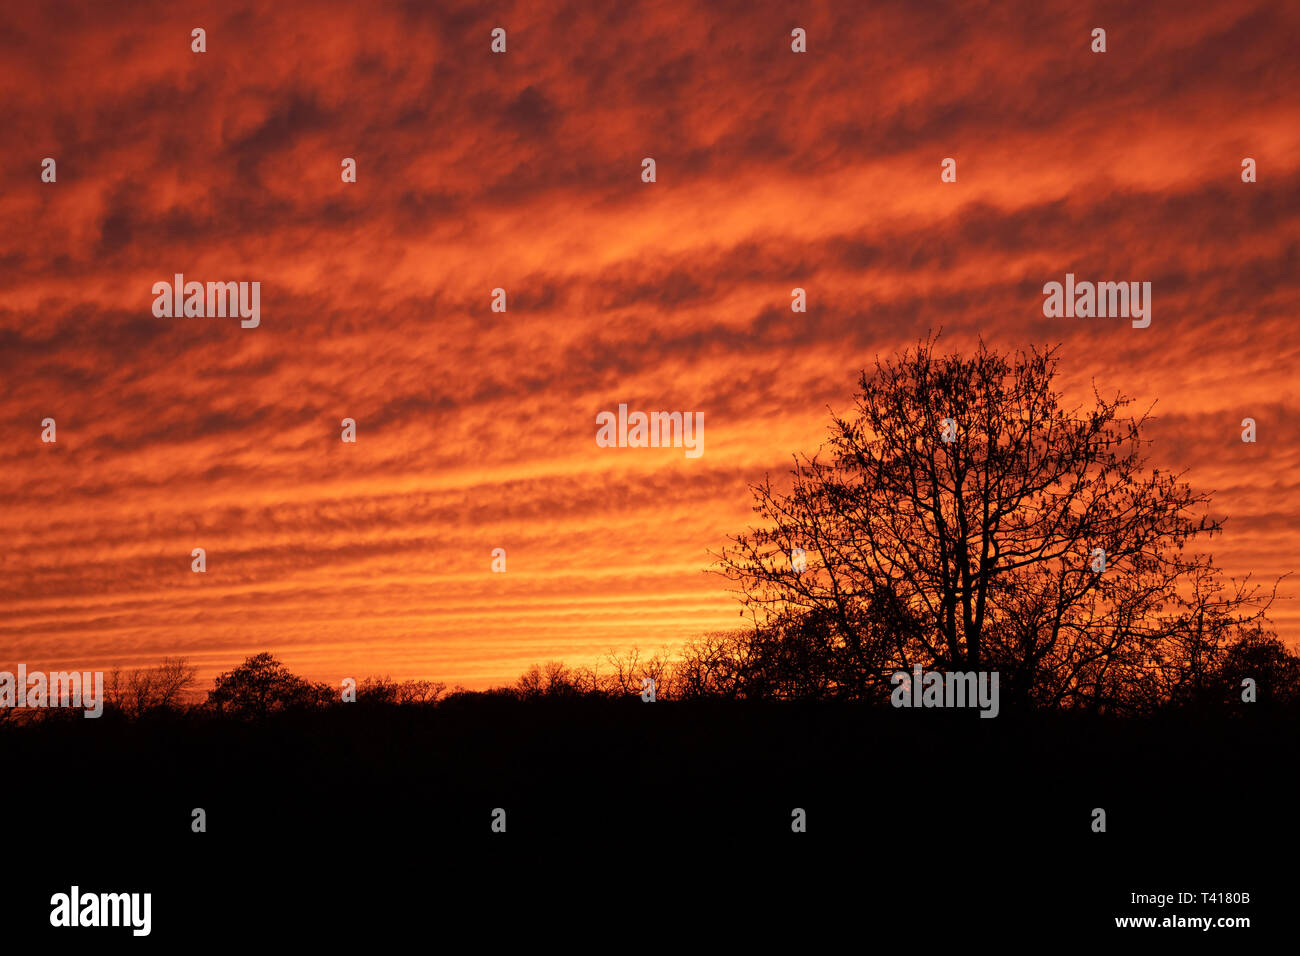 Mackerel sky at sunset; vibrantly colored undulating clouds silhouetted by trees Stock Photo